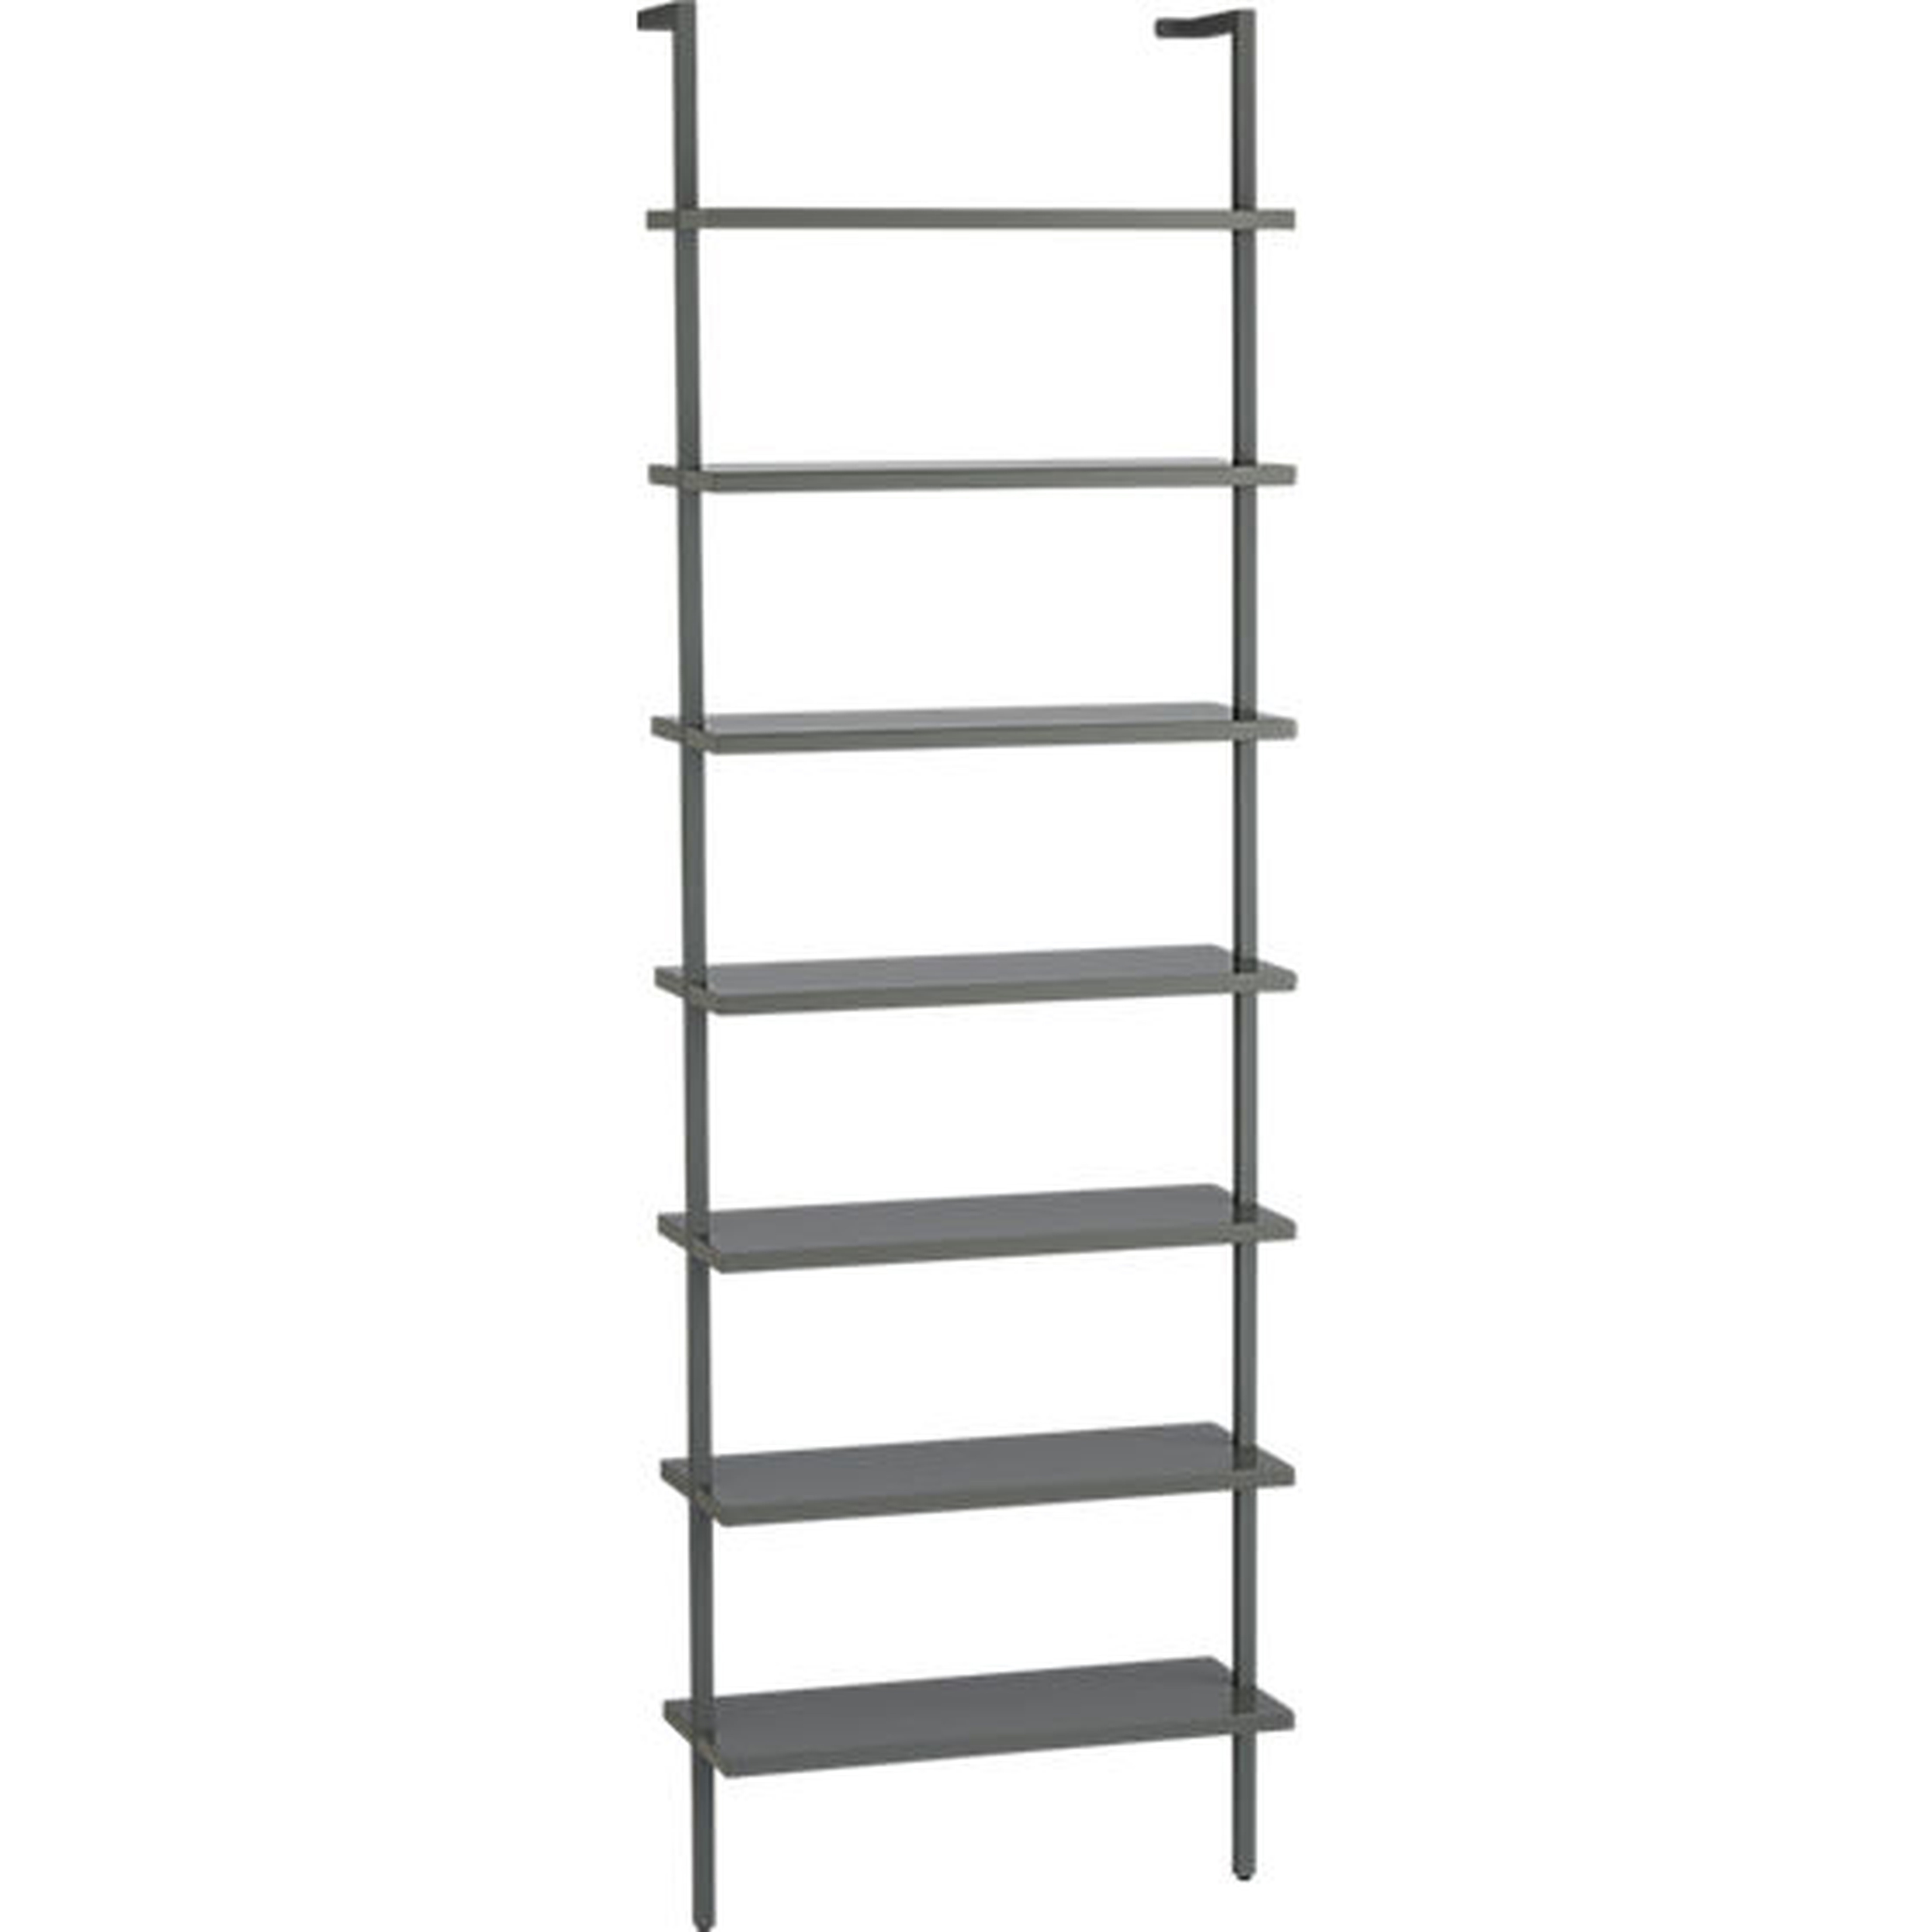 Stairway black 96" wall mounted bookcase - CB2